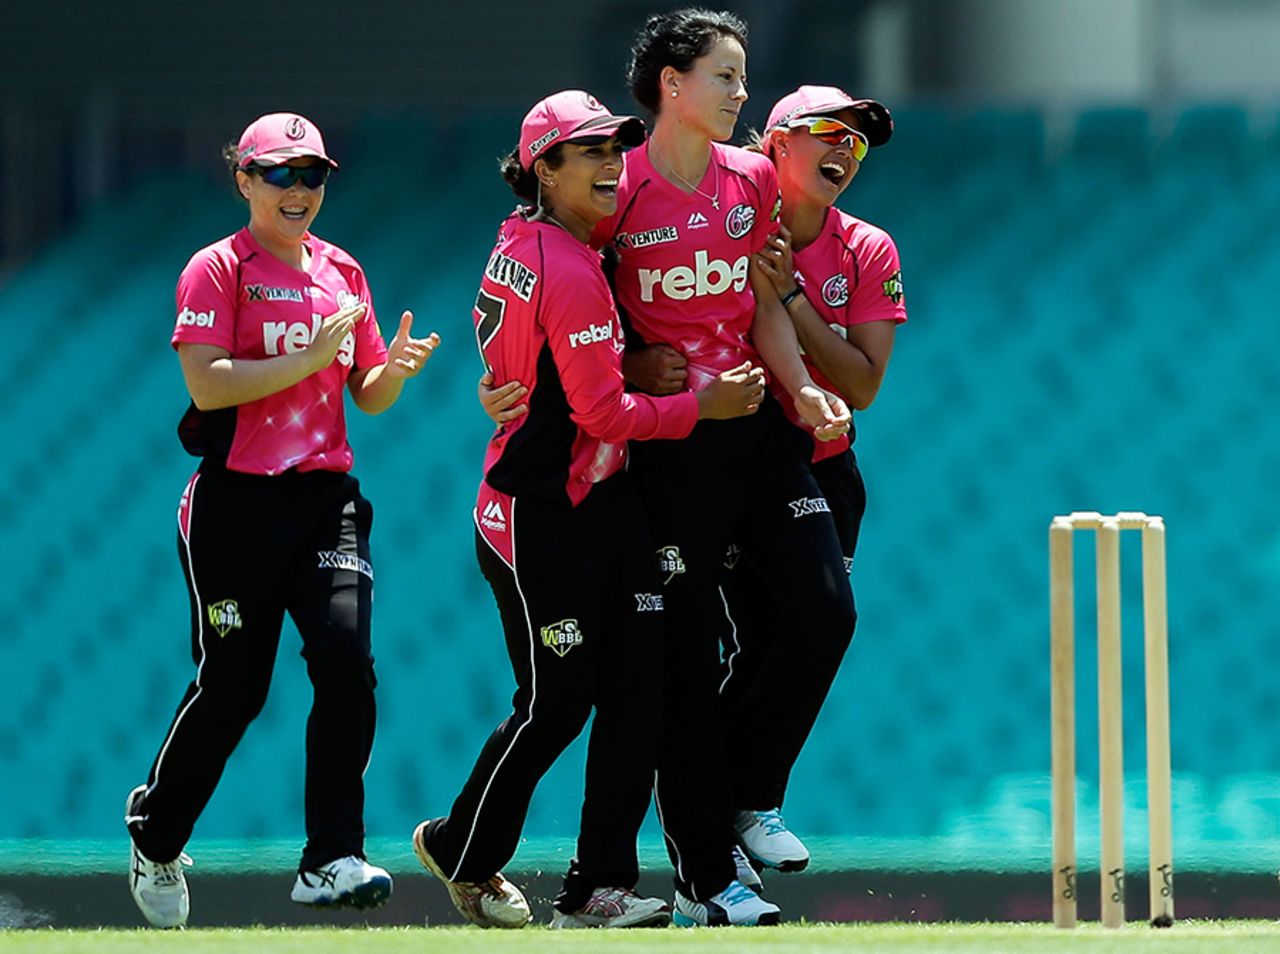 Marizanne Kapp gave Sydney Sixers early momentum with two top-order wickets, Sydney Sixers Women v Perth Scorchers Women, Women's Big Bash League 2015-16, Sydney, December 20, 2015